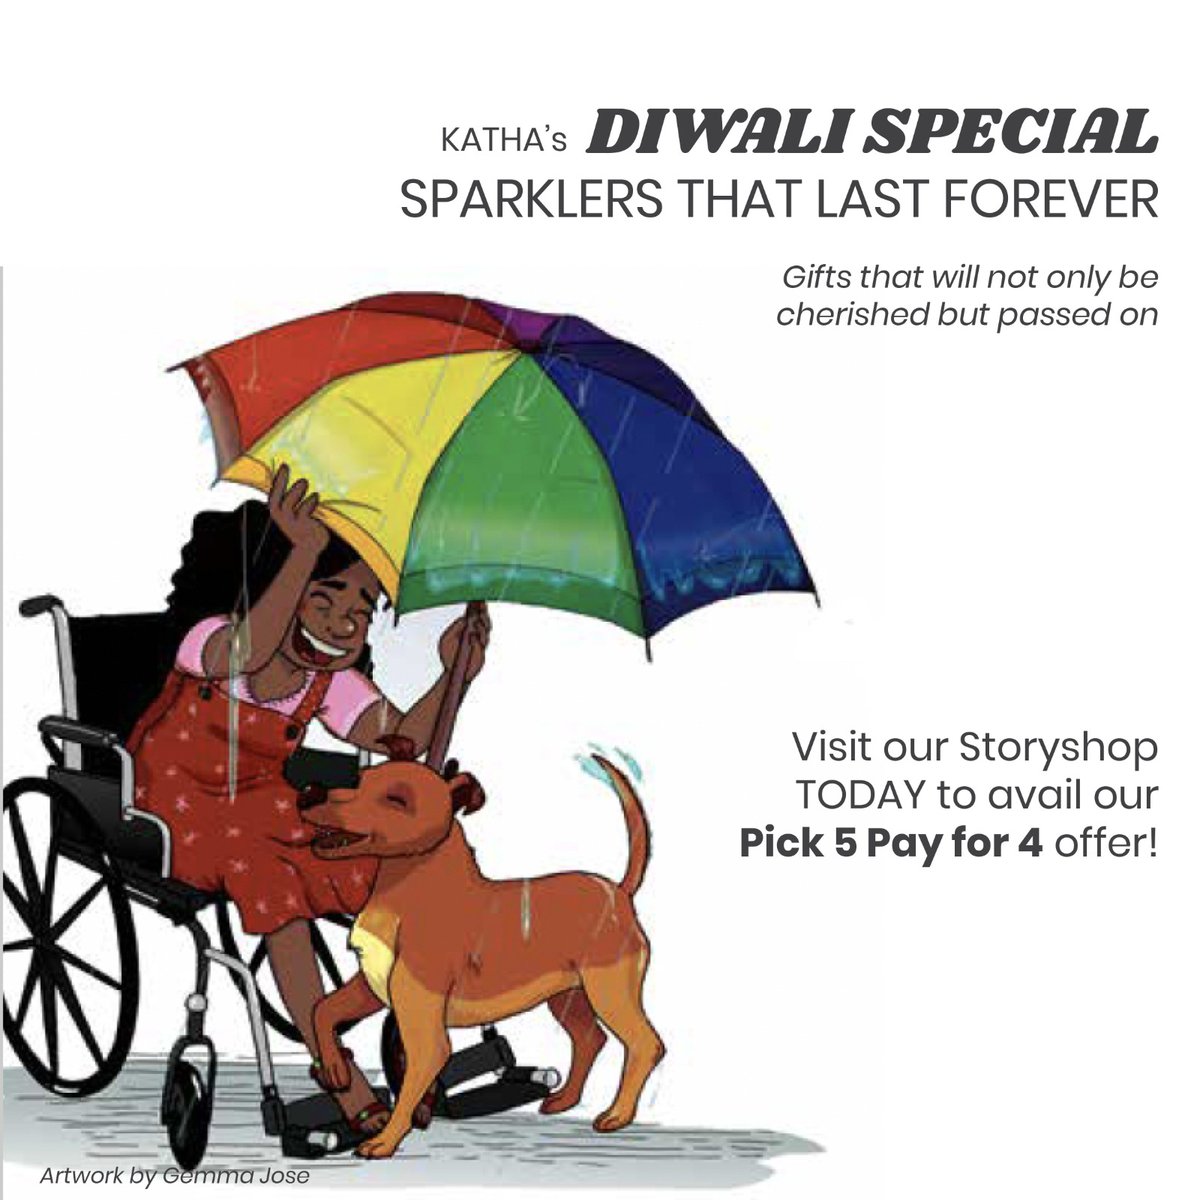 Looking for the perfect Diwali gift for your kids? Look no further than Katha’s Diwali Special. Pick up some real page turners for them and we’ll gift you one for the kids next door too!
#DiwaliReads #KidsBookSale #FestiveReads  #ChildrensBooks #BookLoversDiwali #GiftABook